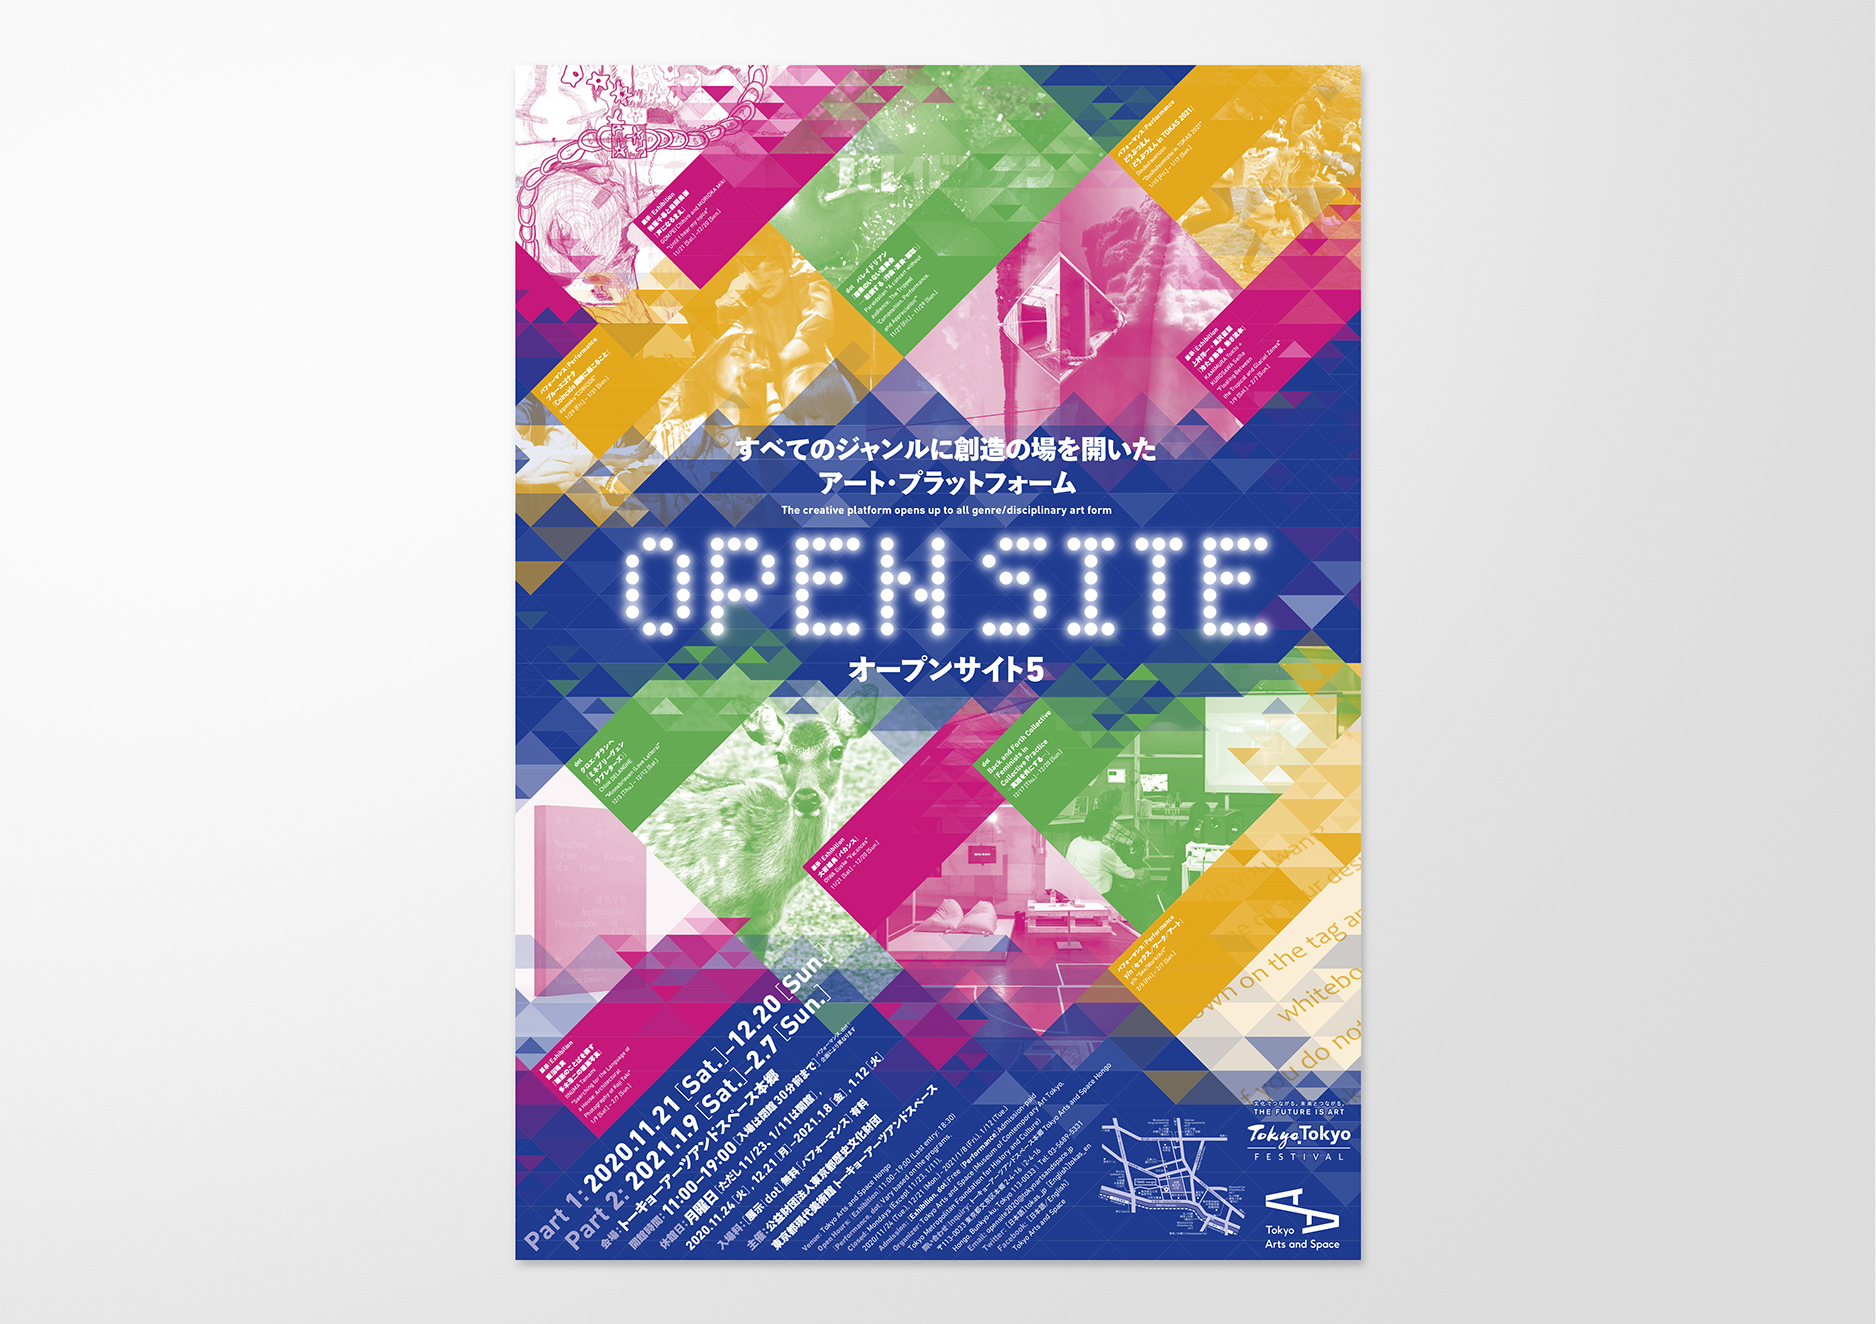 opensite20-21_poster_01